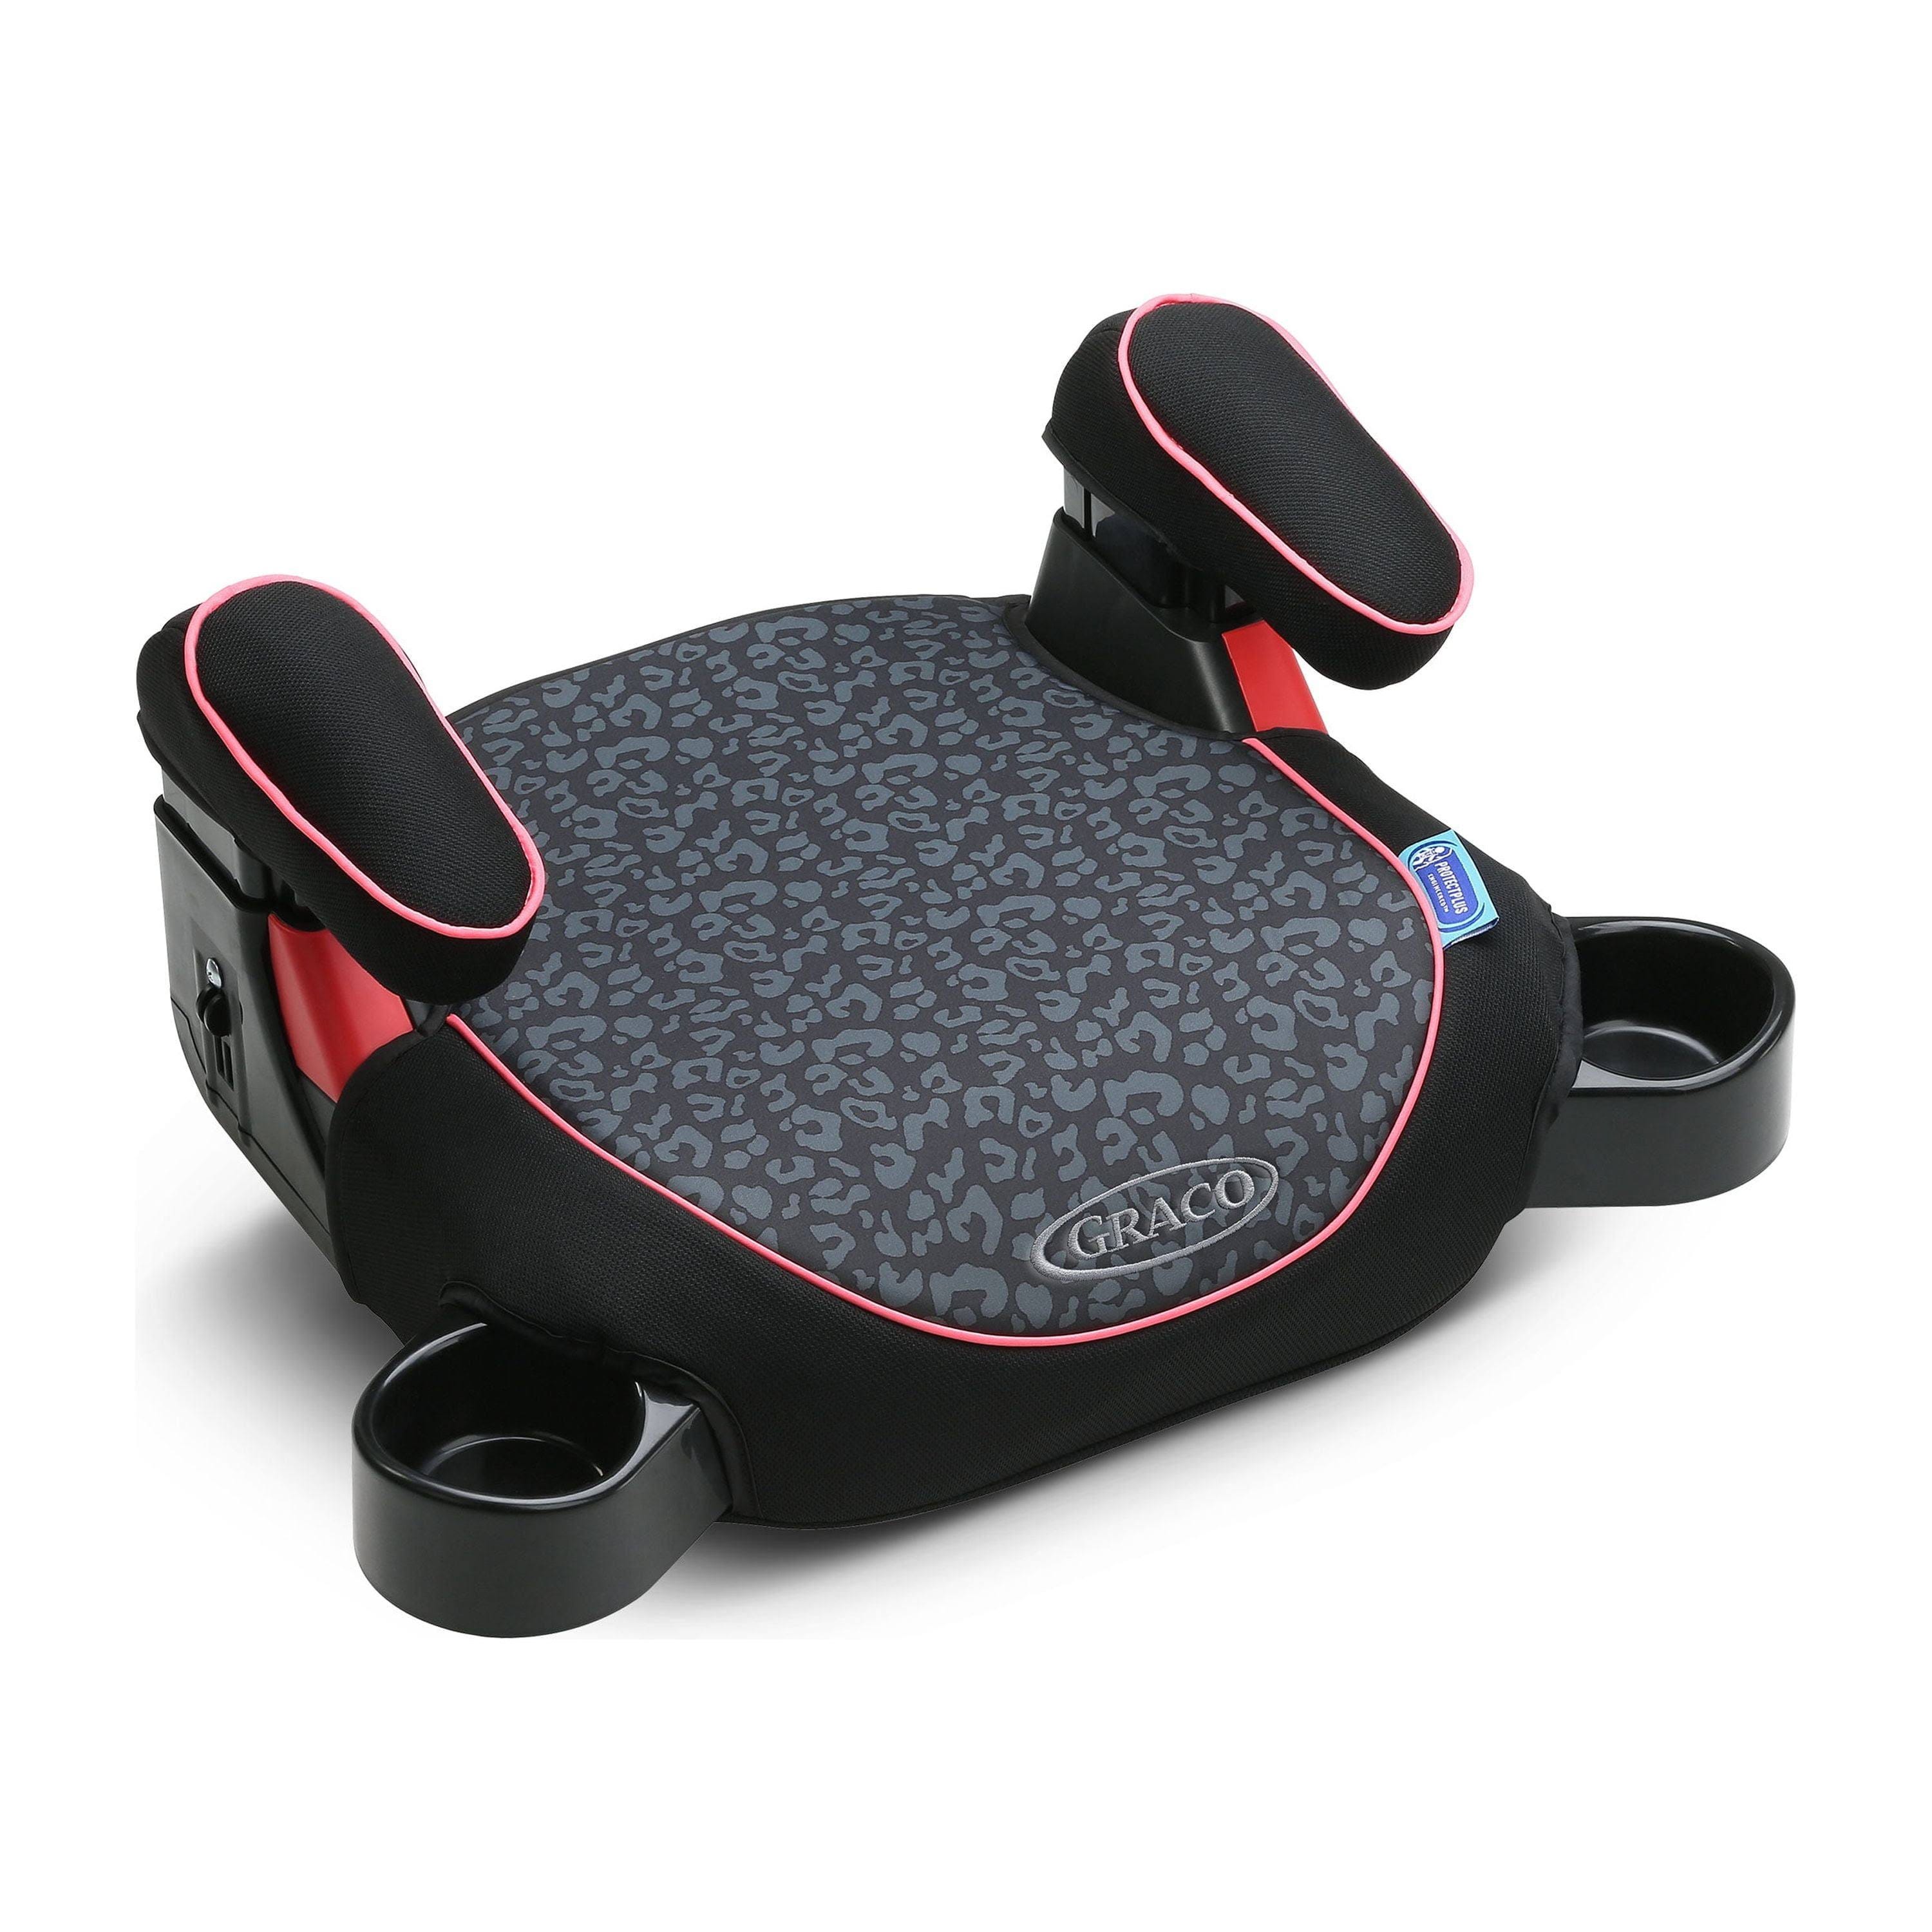 Graco TurboBooster Backless Booster Seat: Safe, Comfortable, and Convenient for Kids | Image